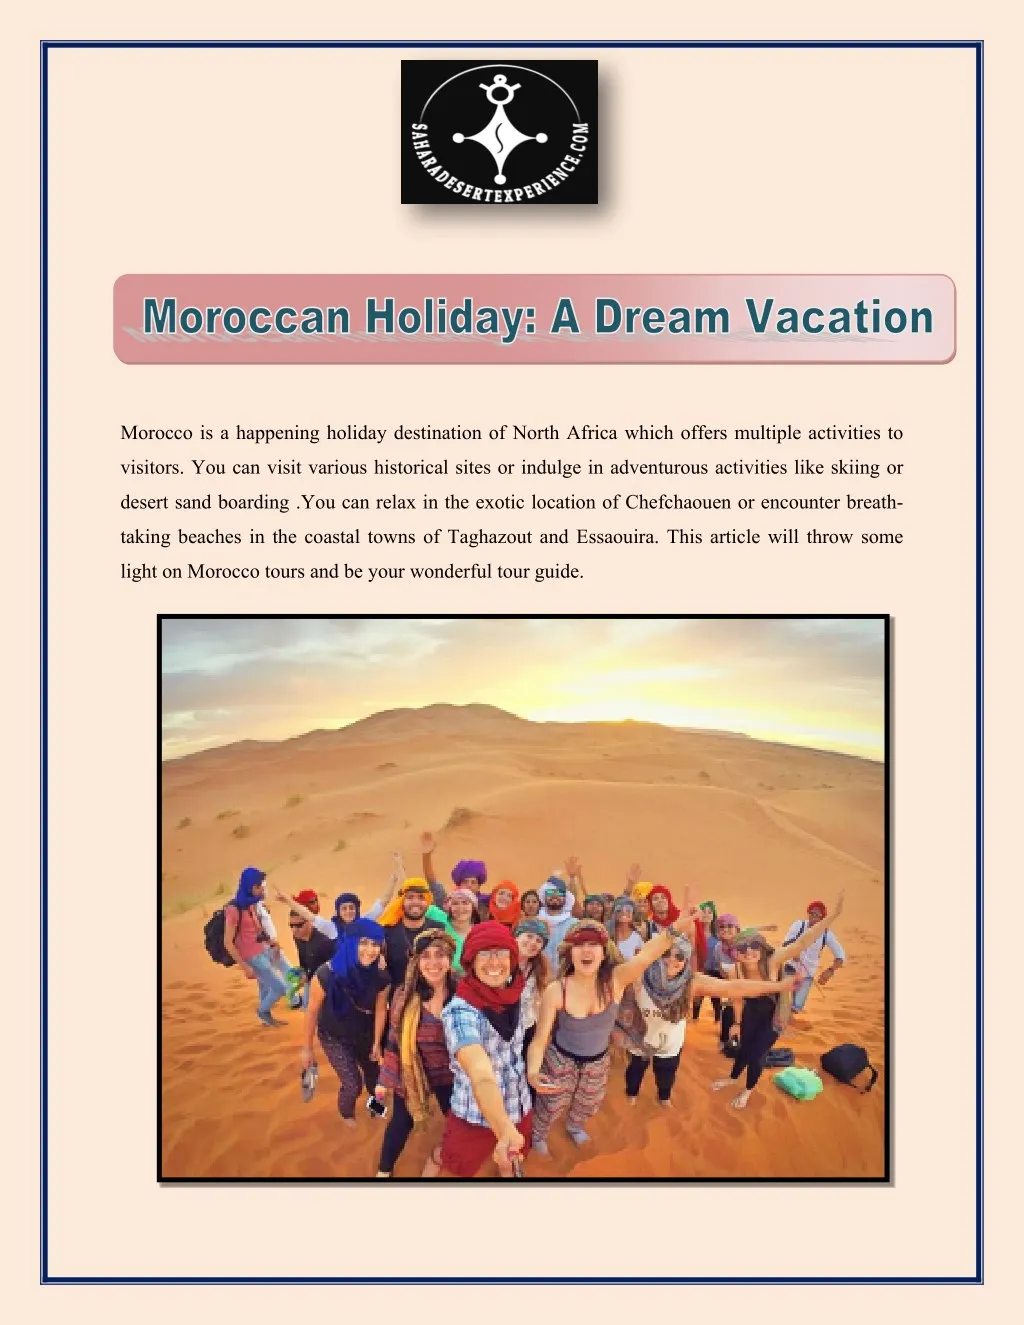 morocco is a happening holiday destination